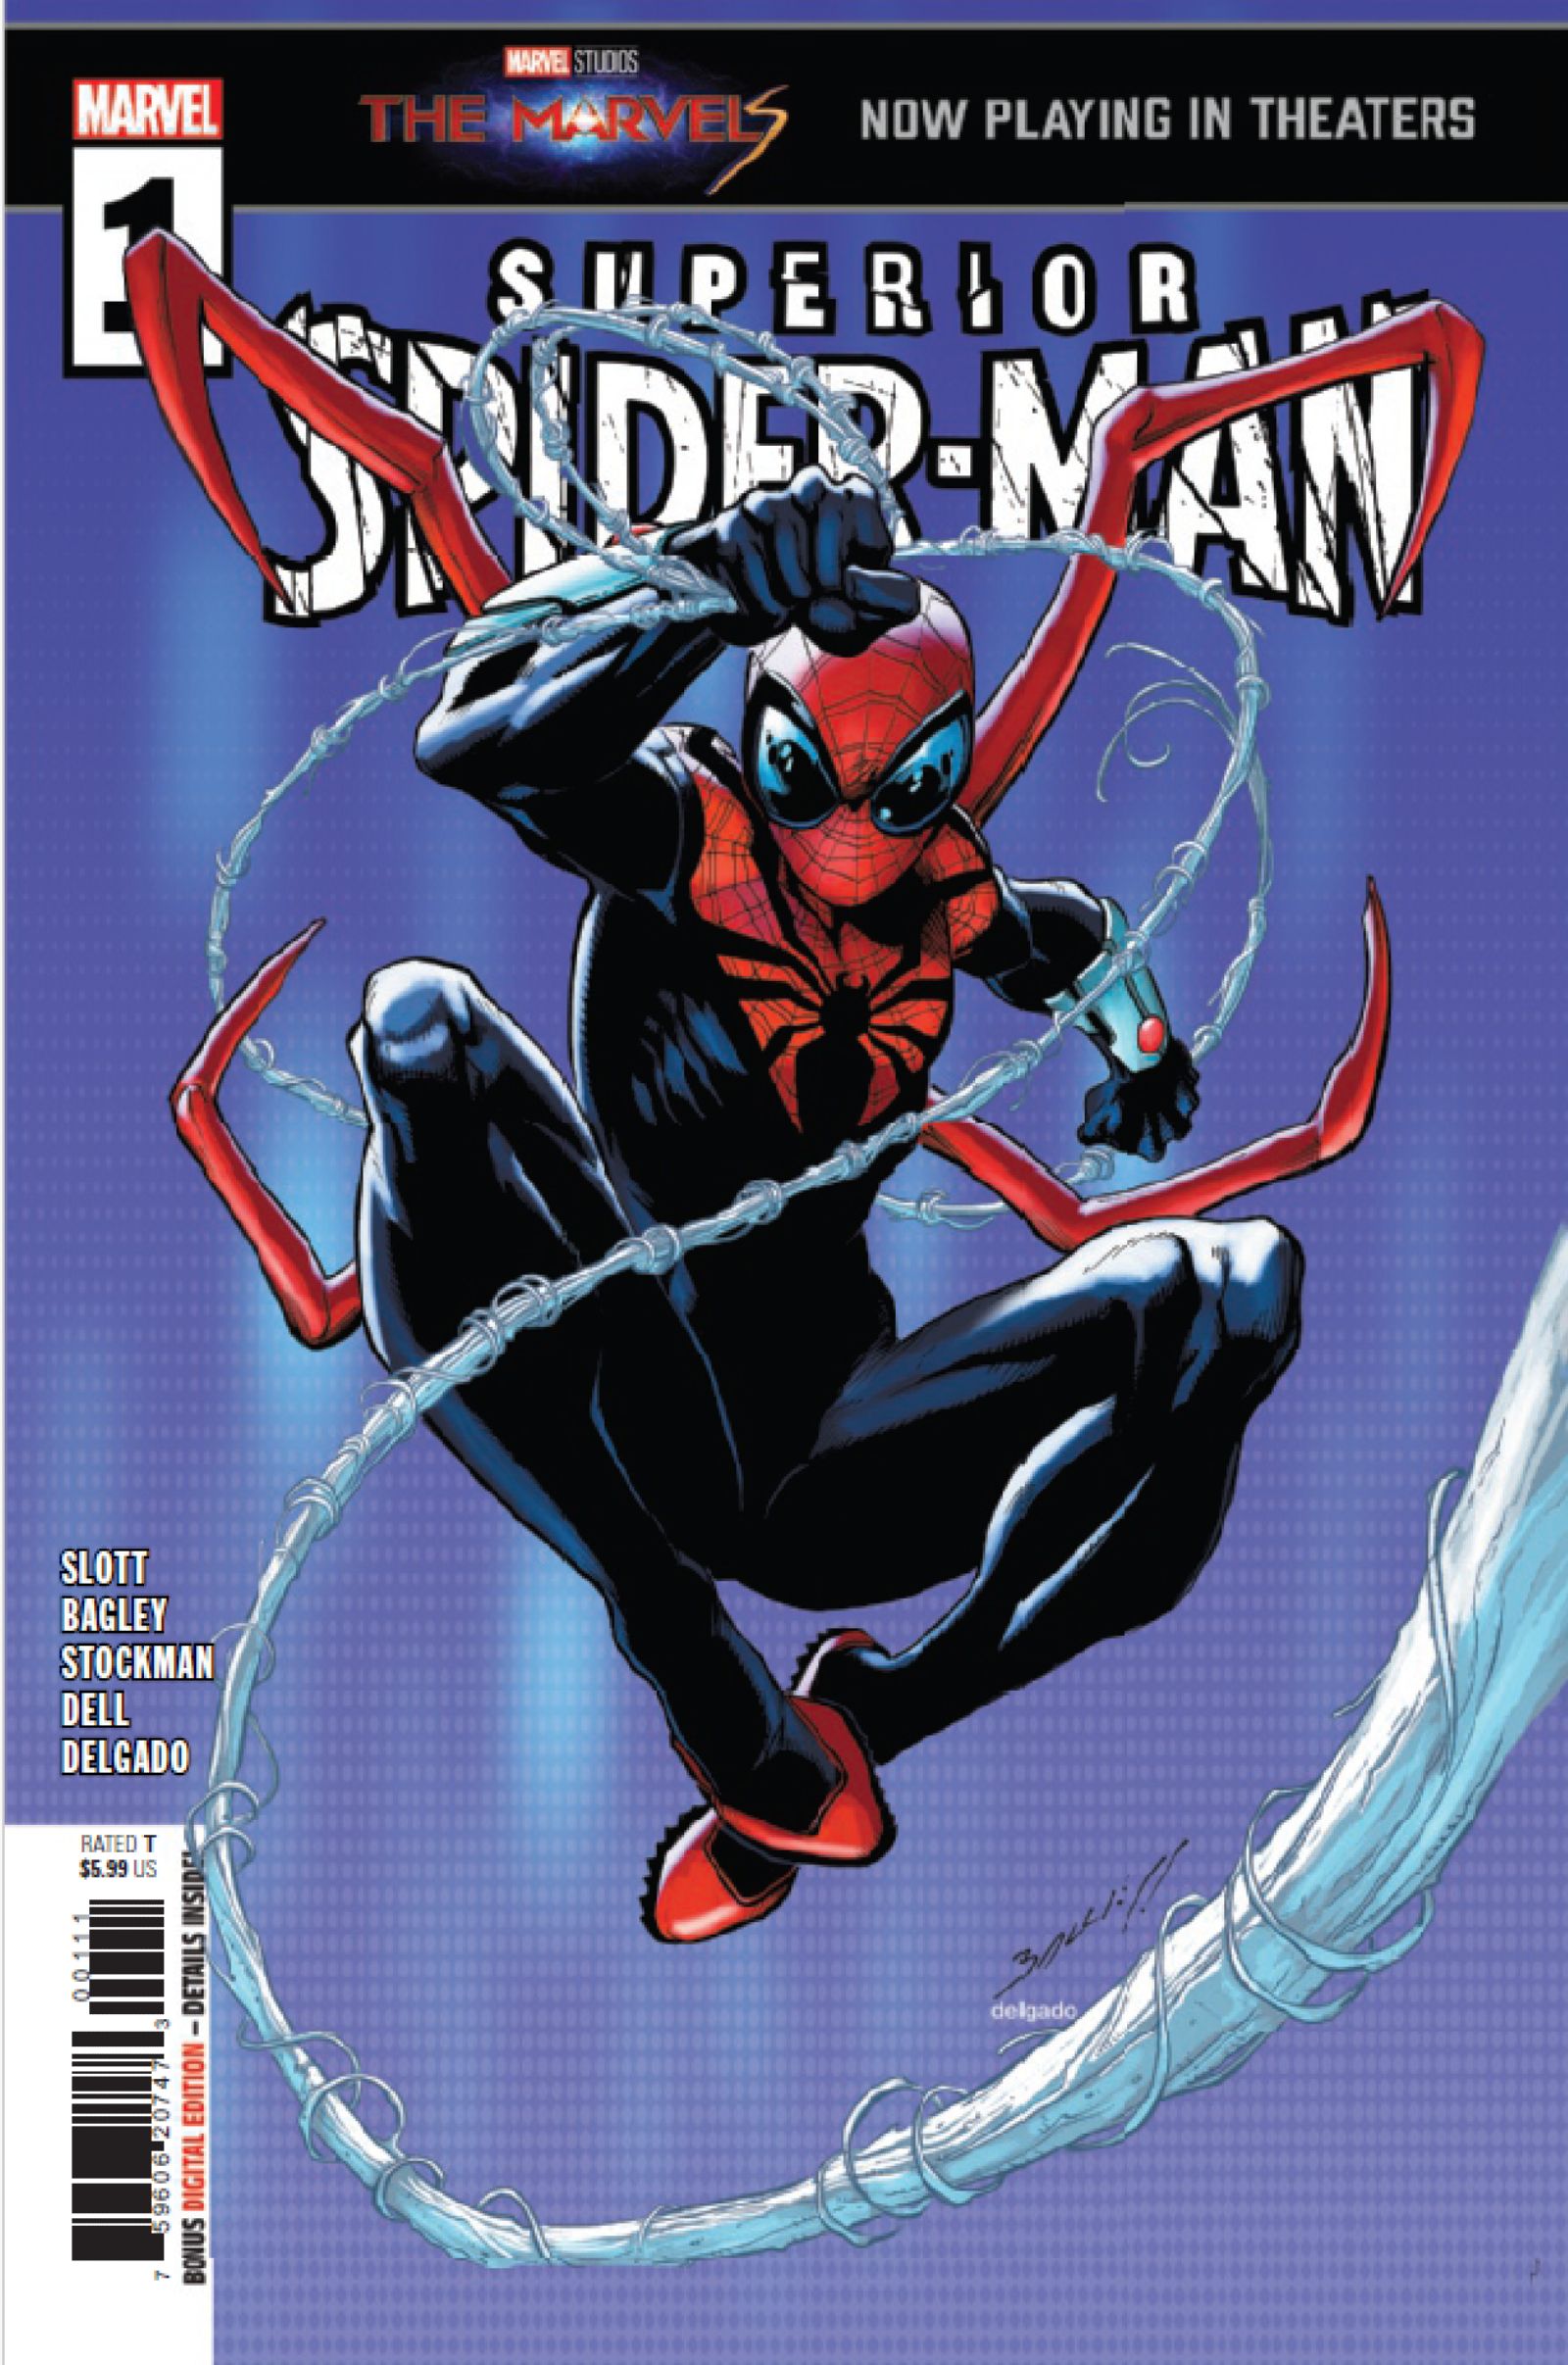 The Superior Spider-Man swings into action in Superior Spider-Man (Vol. 3) #1